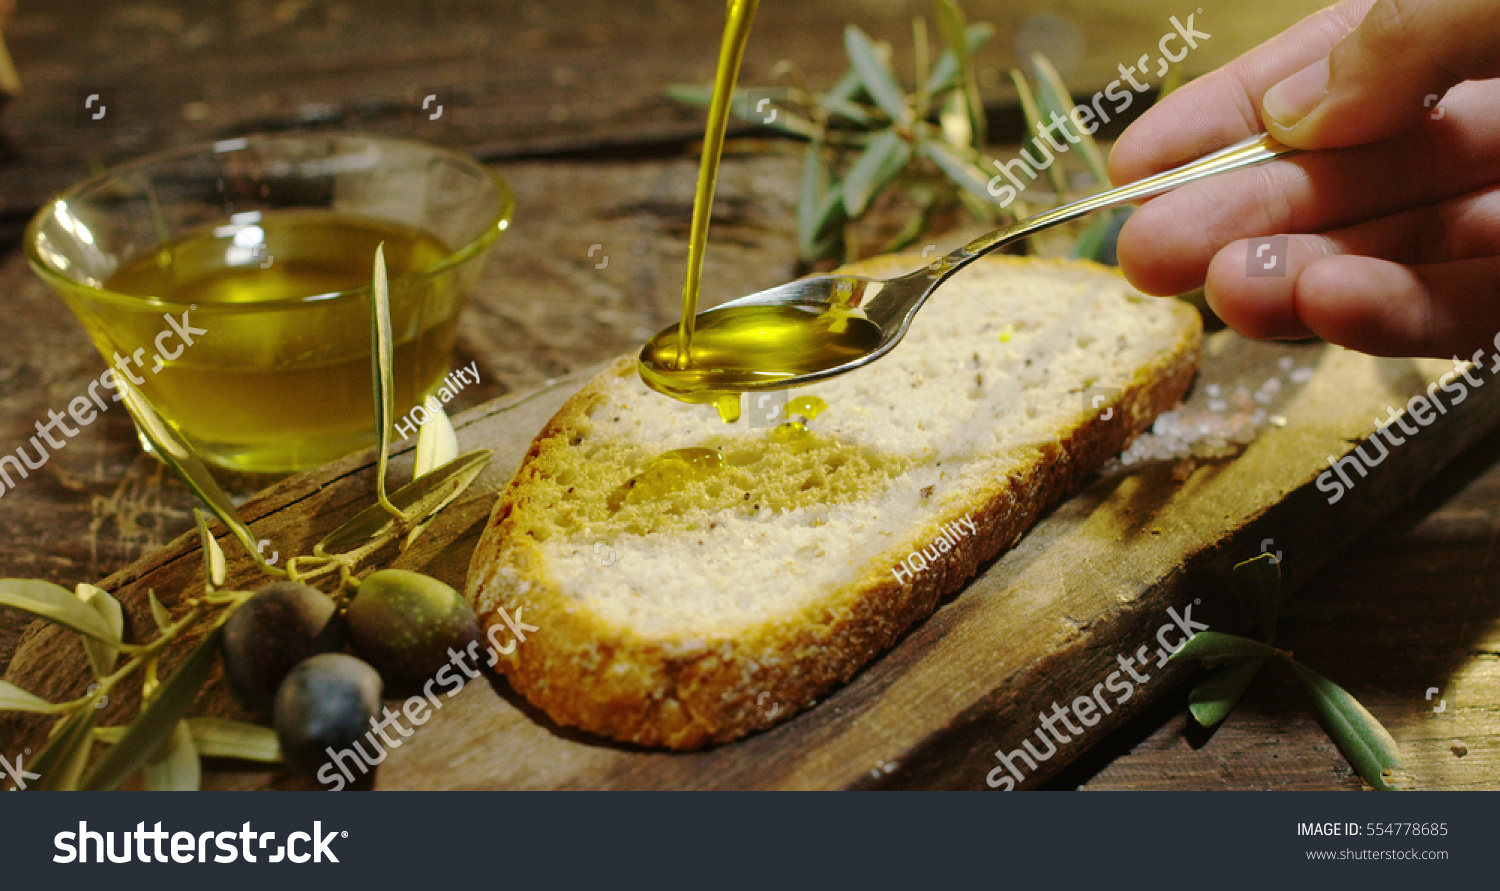 Genuine Italian organic oil cold pressed in slow motion falls on organic bread. concept of nature and healthy food, healthy and natural. fresh olives and Tuscan Italian oil #554778685